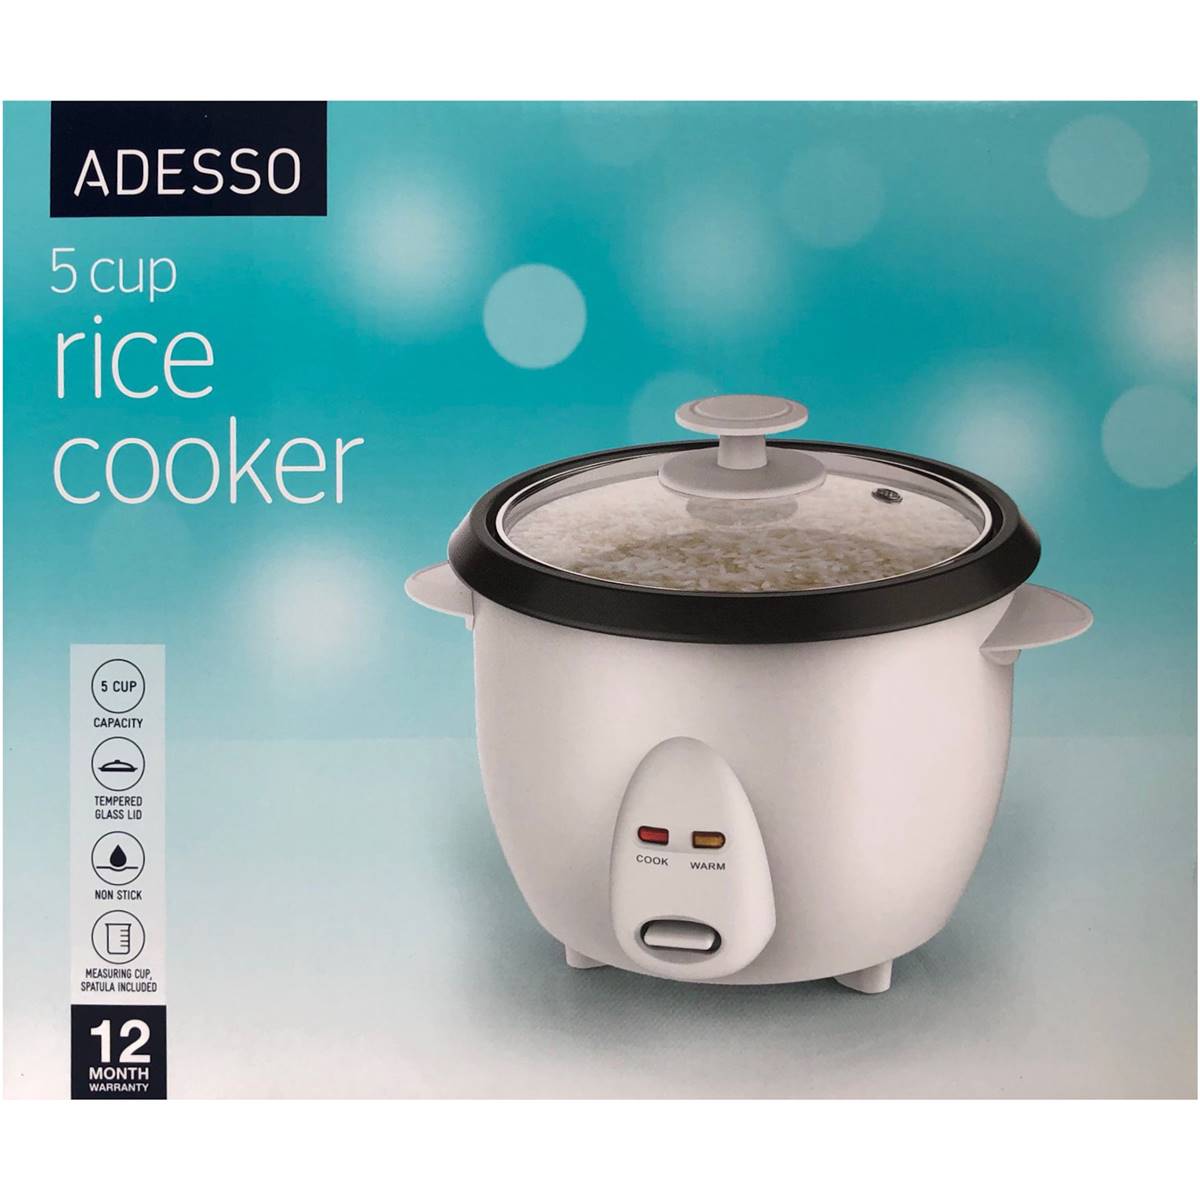 adesso rice cooker instructions